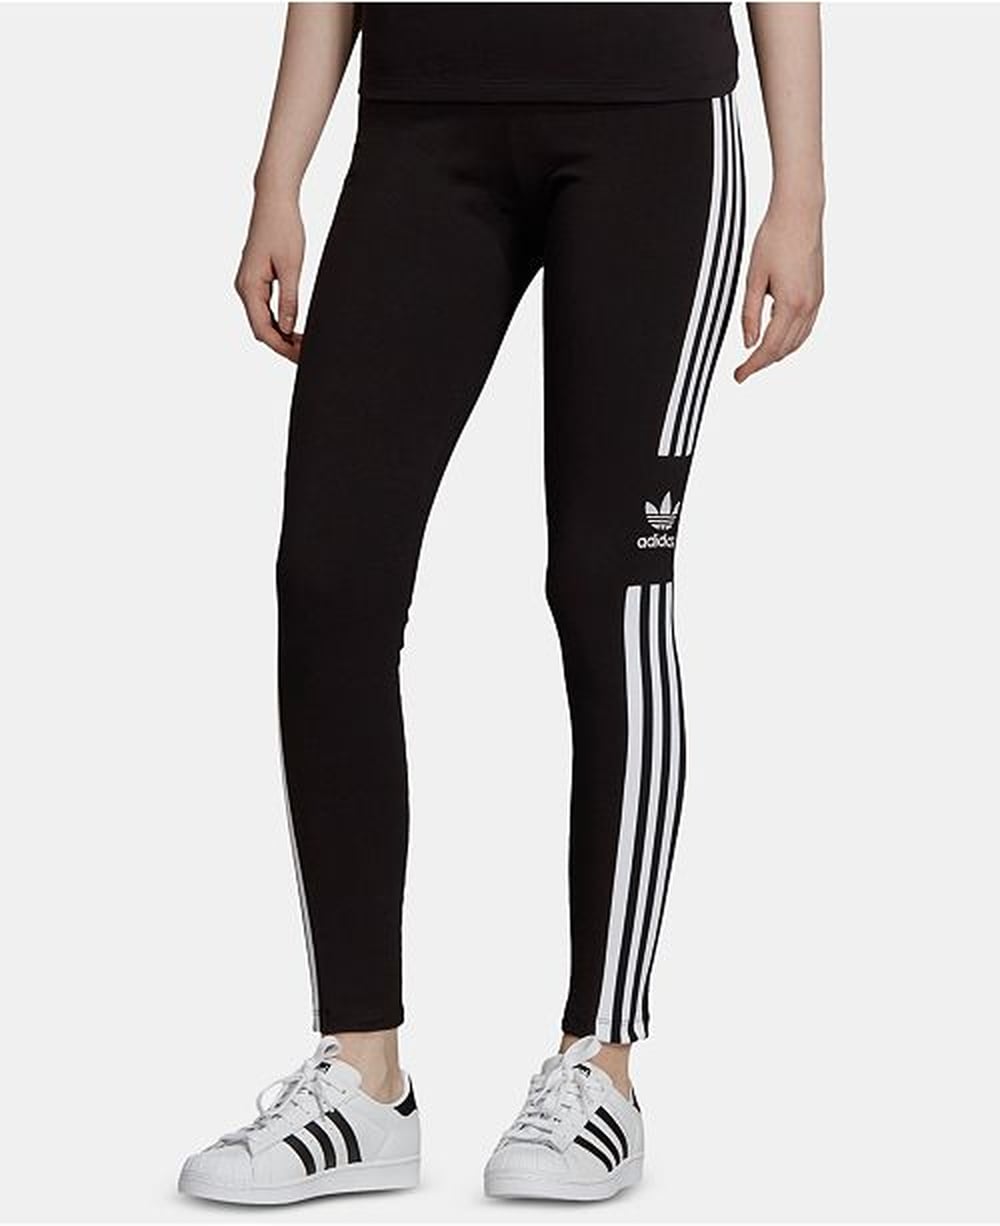 The Best Workout Clothes From Macy's | POPSUGAR Fitness